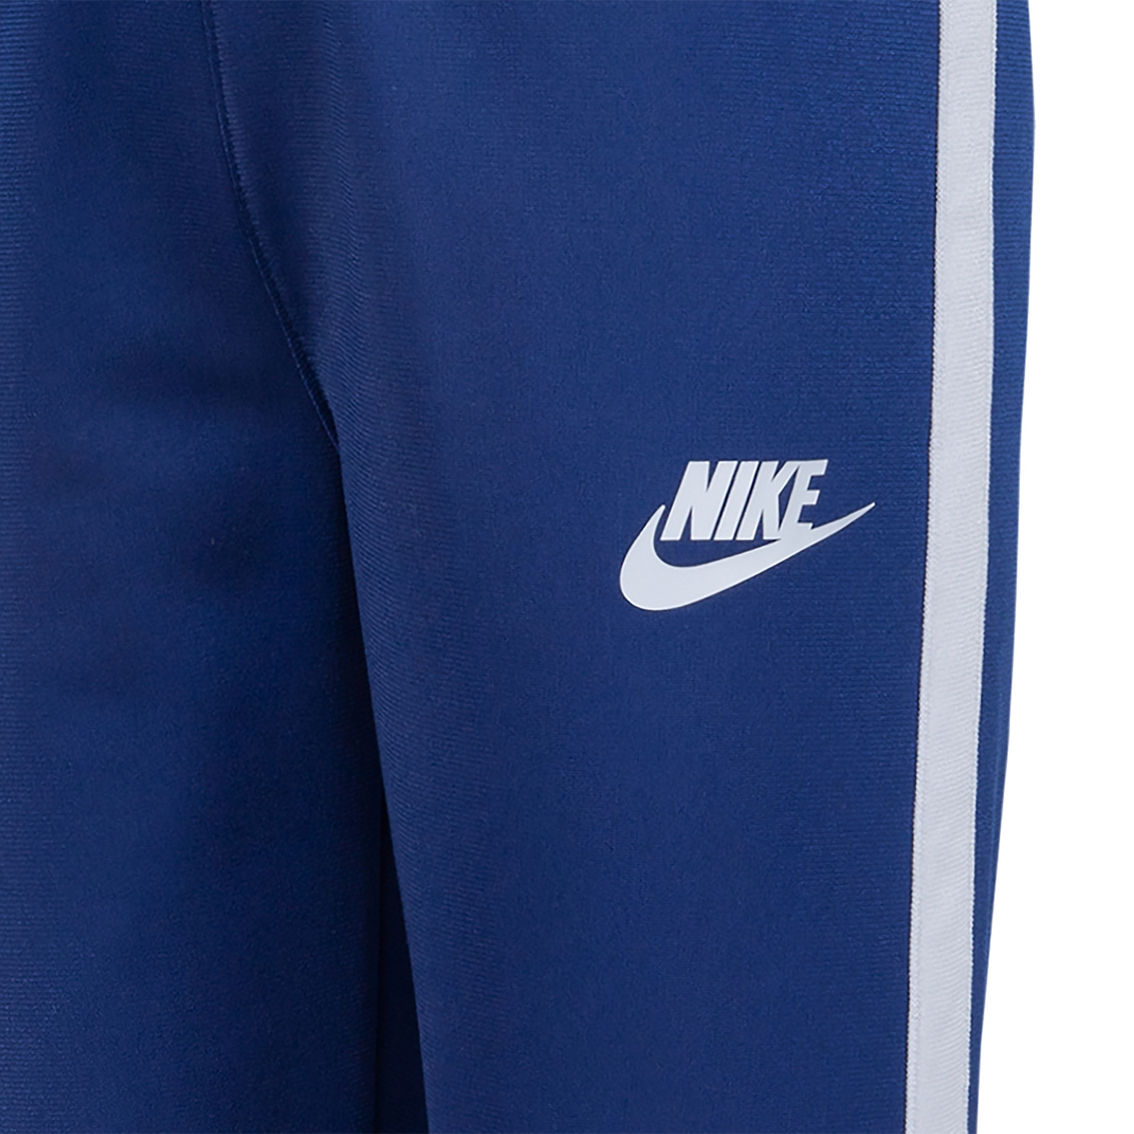 Nike Boys Cyber Tricot Jacket and Pants 2 pc. Set - Image 5 of 5